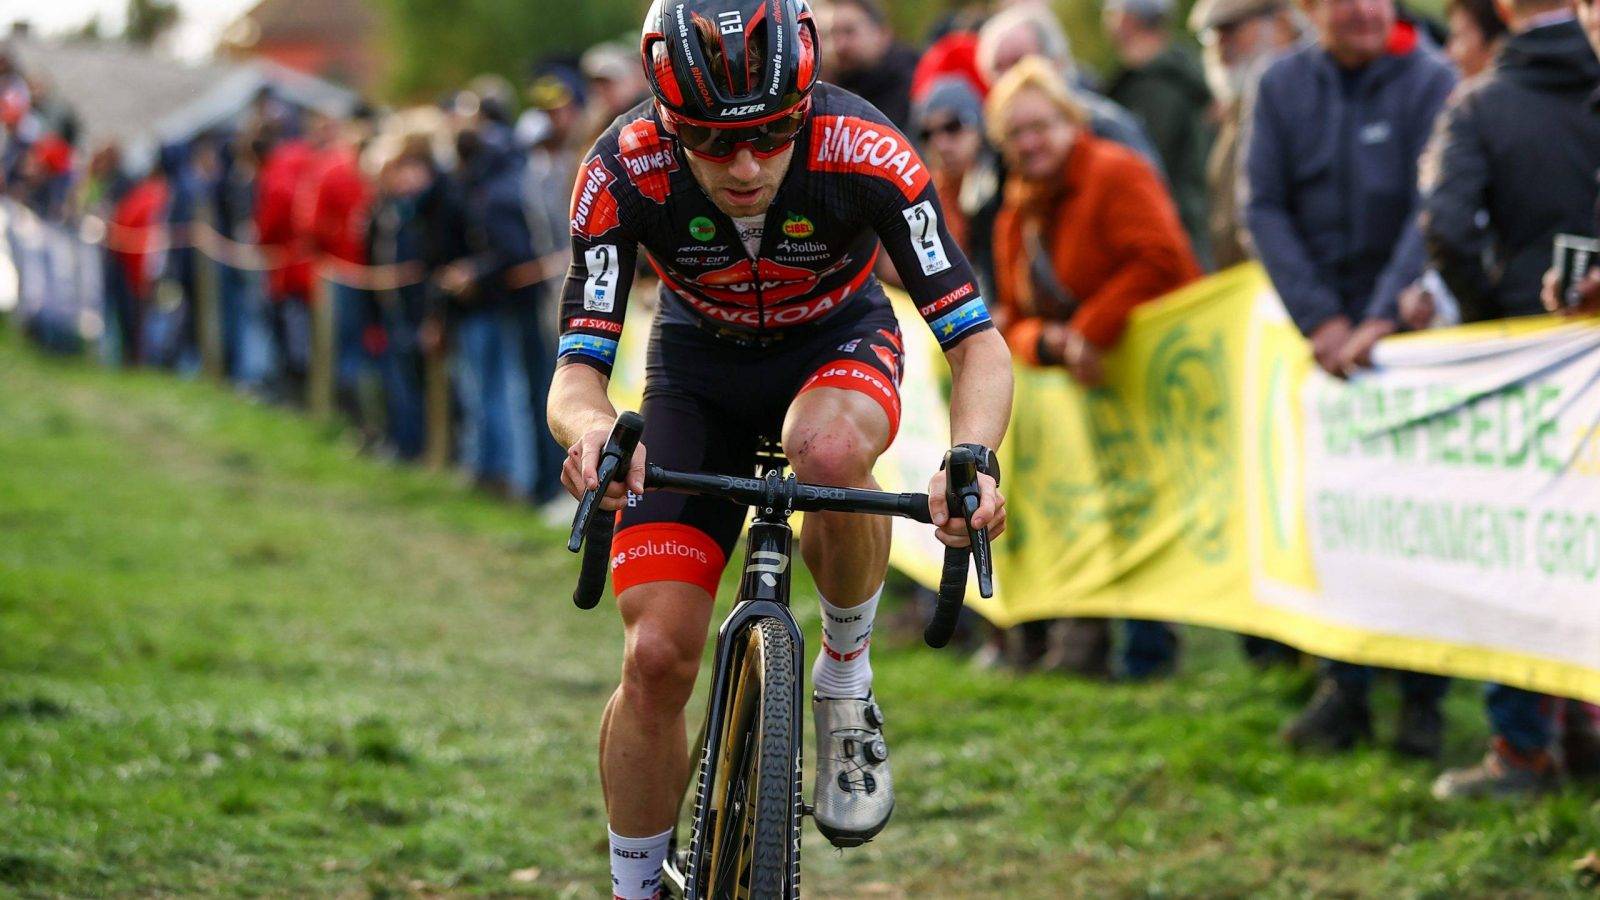 Belgian Eli Iserbyt pictured in action during the men's race during the Koppenbergcross, the first race (out of eight) of the X2O Badkamers trophy, in Melden, on Tuesday 01 November 2022. BELGA PHOTO DAVID PINTENS